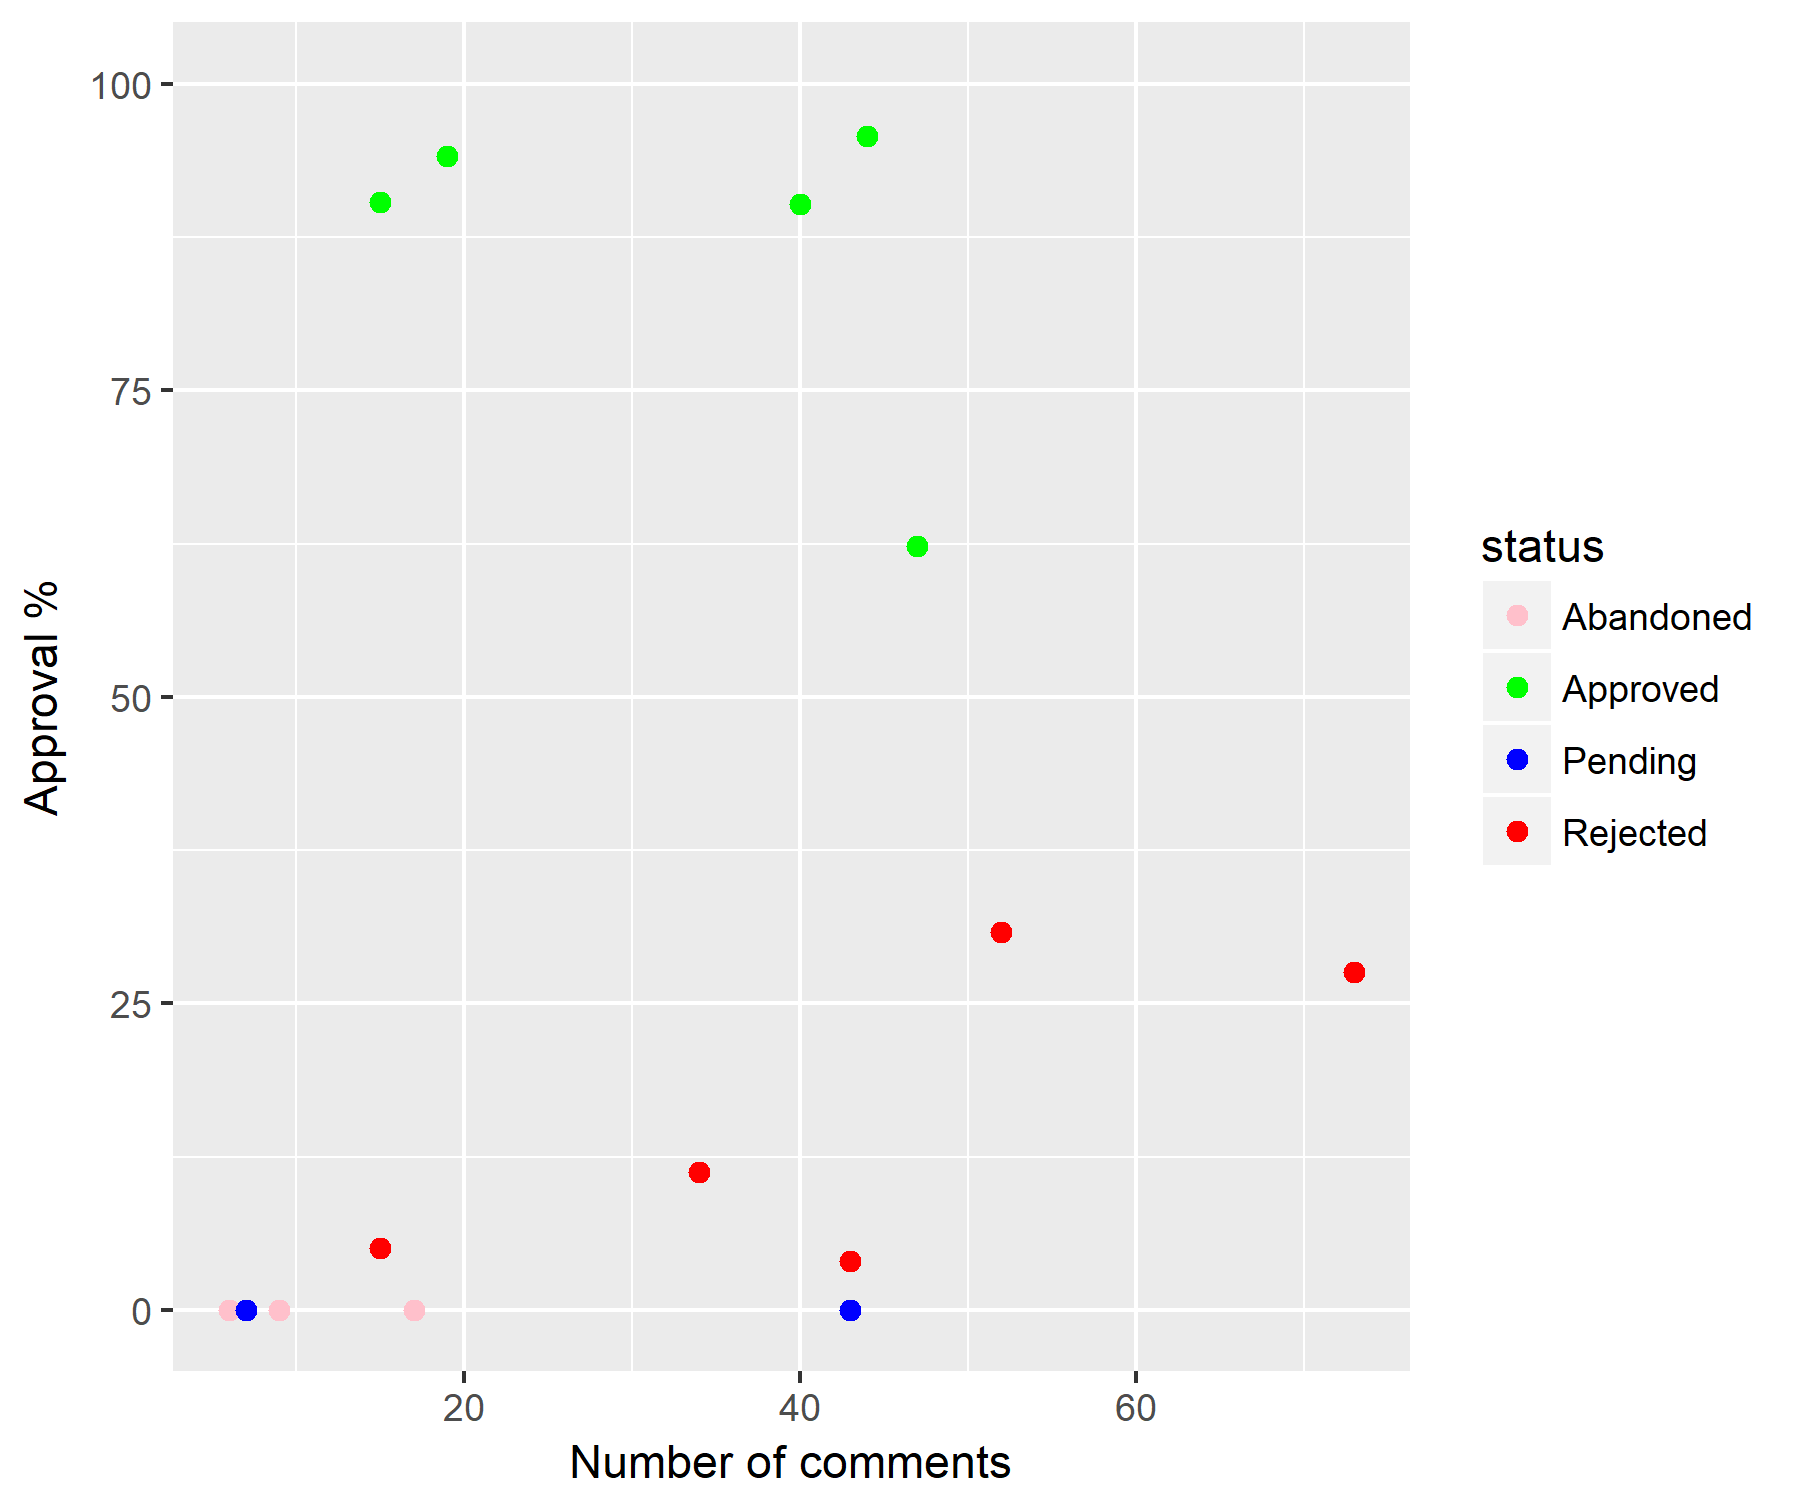 Scatterplot showing proposal approval % and number of comments